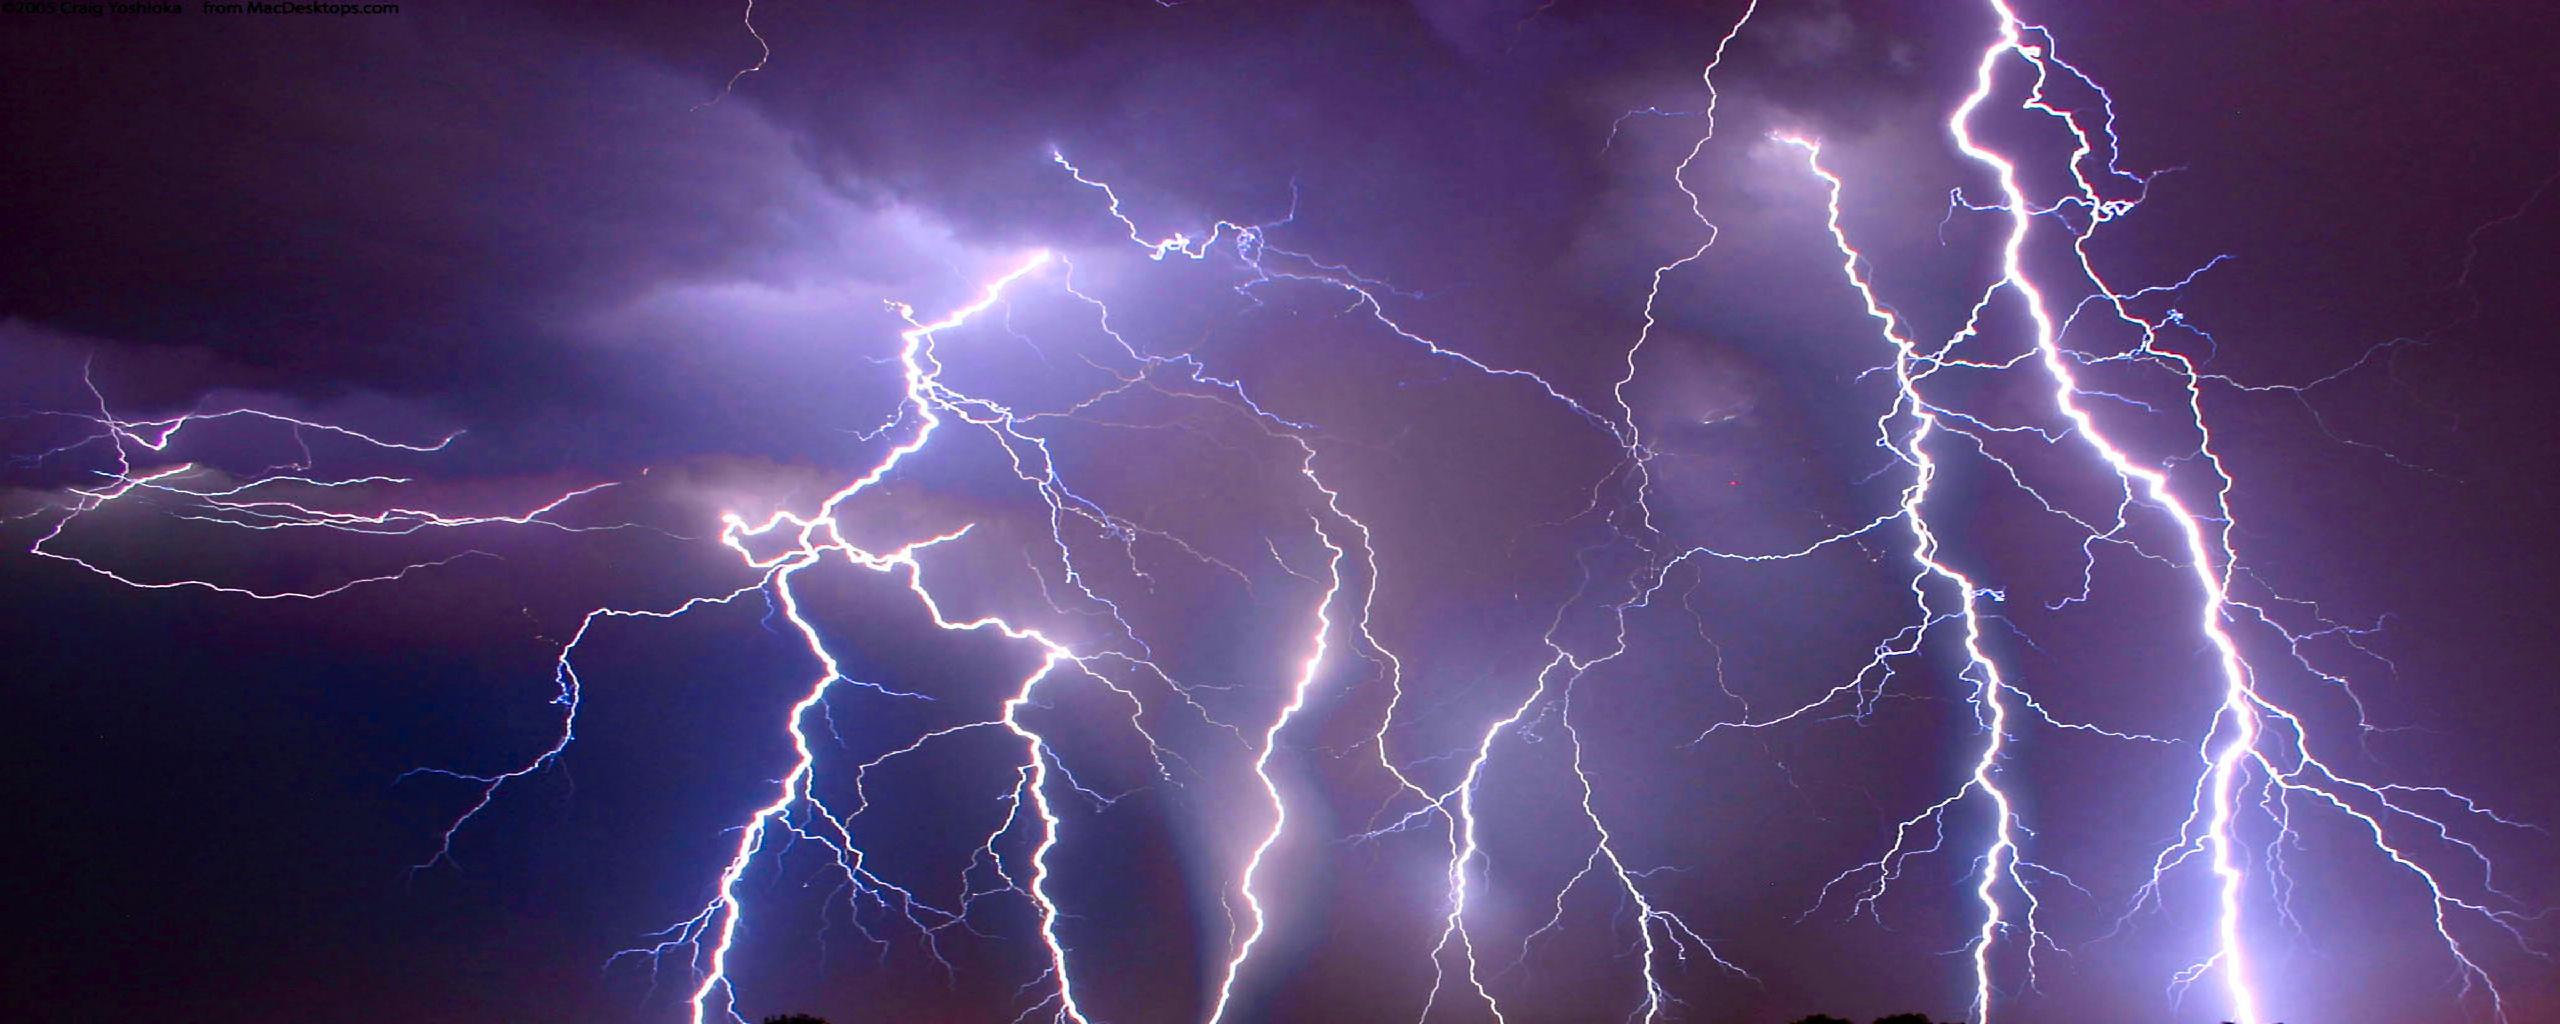 Lightning Storm Background Image Amp Pictures Becuo